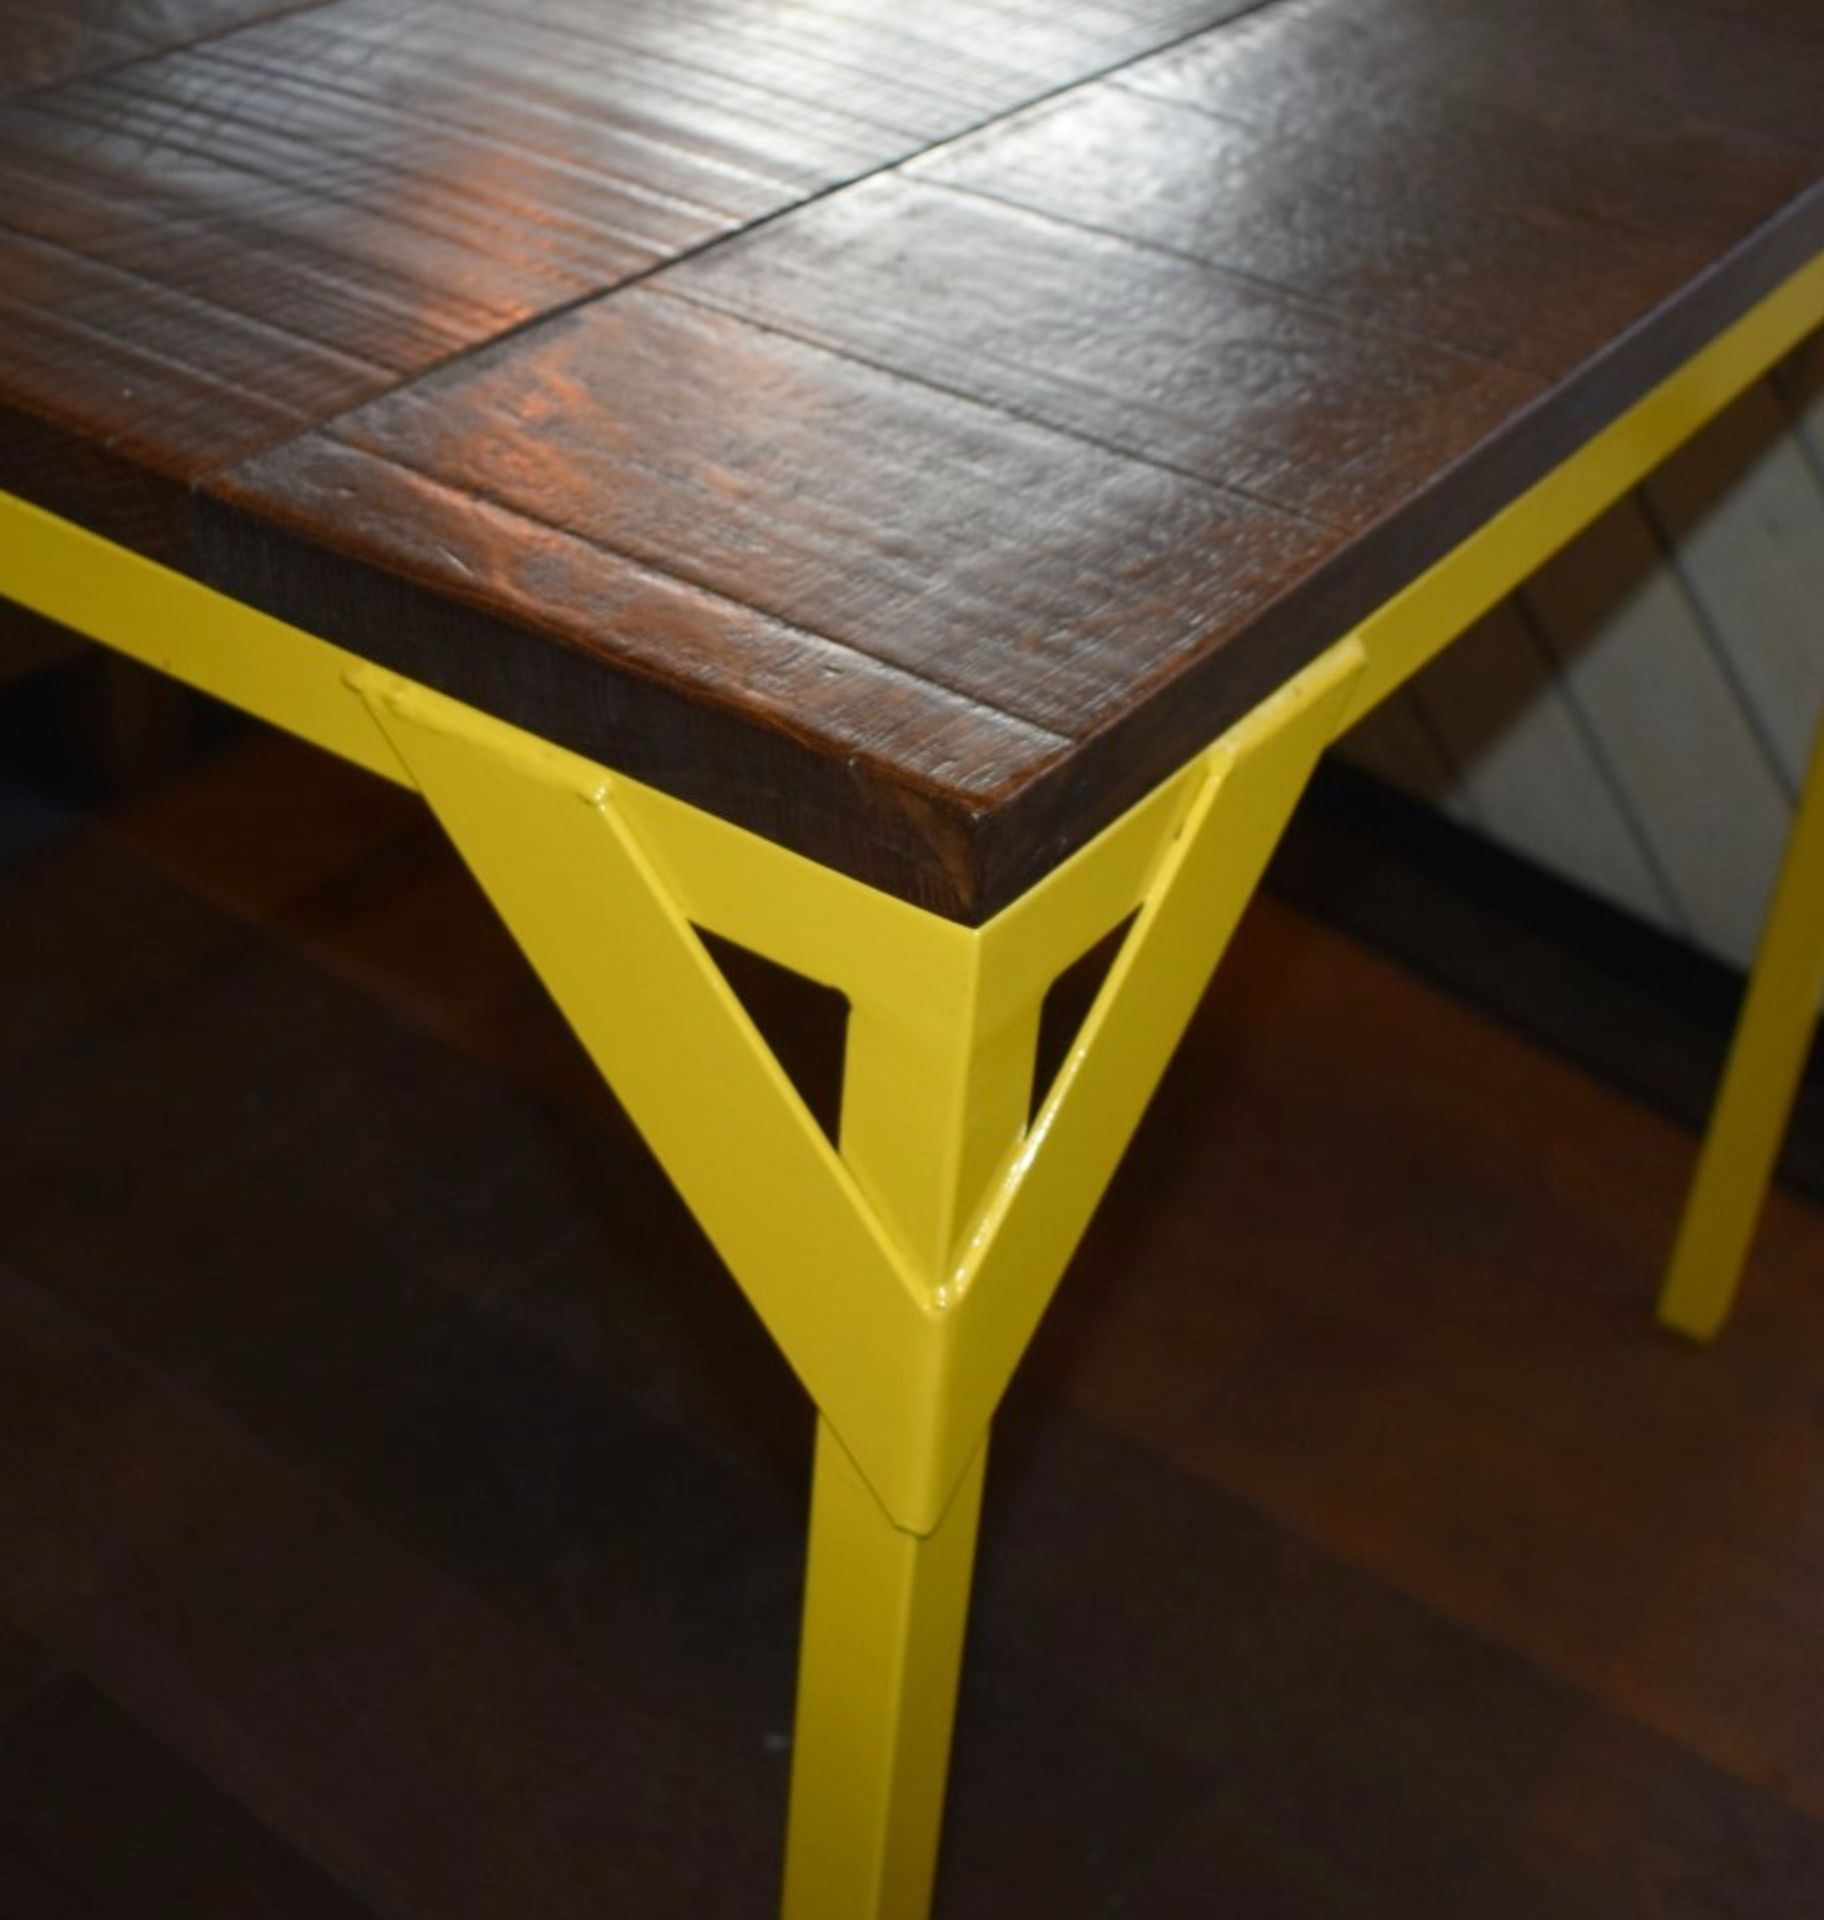 2 x Dining Tables With Bright Yellow Steel Bases and Wooden Panelled Tops - Size: H77  W85 x D85 cms - Image 3 of 4